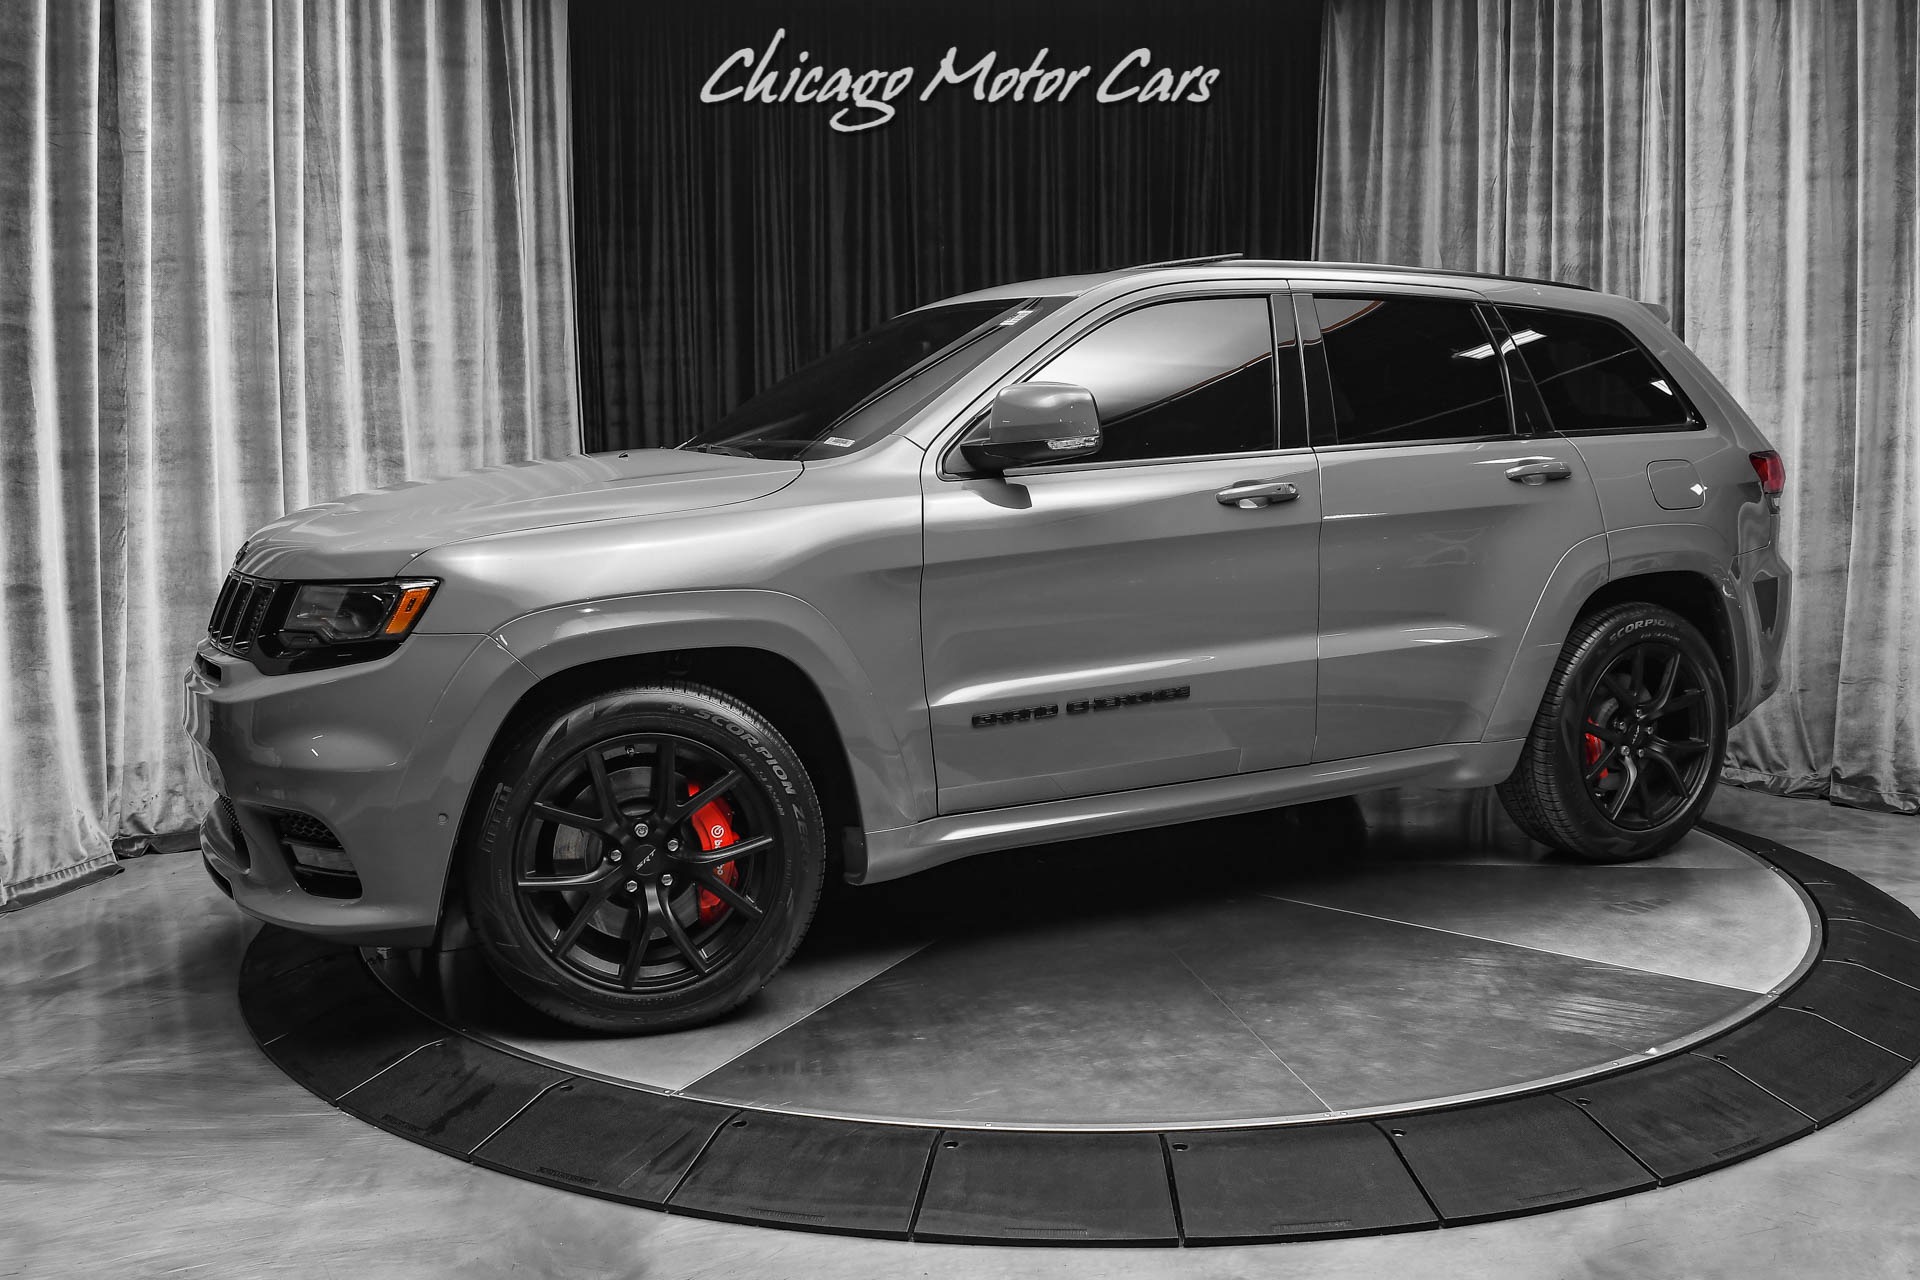 Used 2020 Jeep Grand Cherokee SRT ONLY 1400 Miles! Panoramic Roof!  Harman/Kardon Sound! For Sale (Special Pricing) | Chicago Motor Cars Stock  #18022